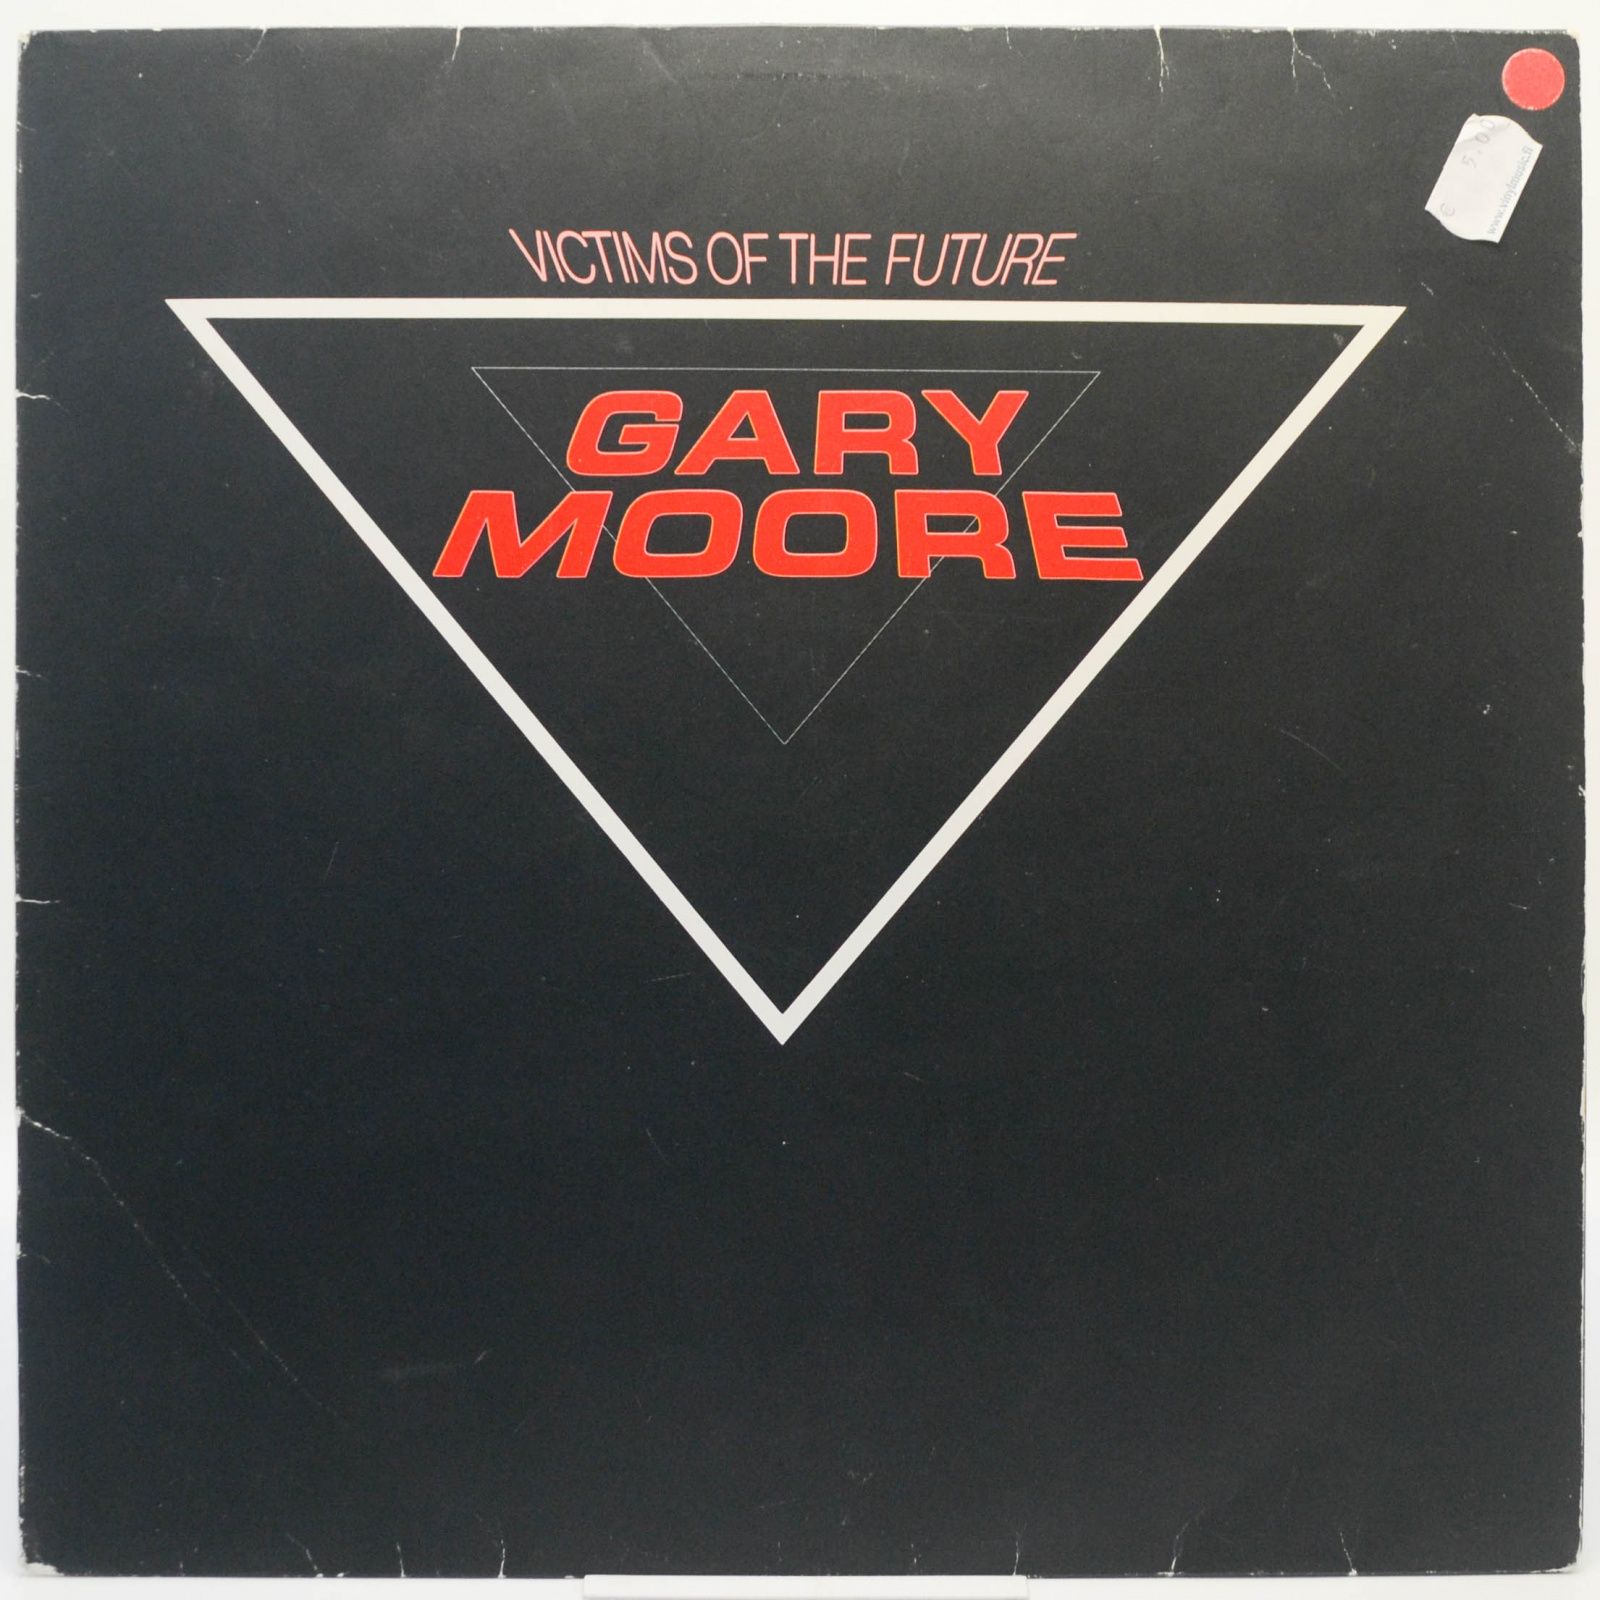 Gary Moore — Victims Of The Future, 1984